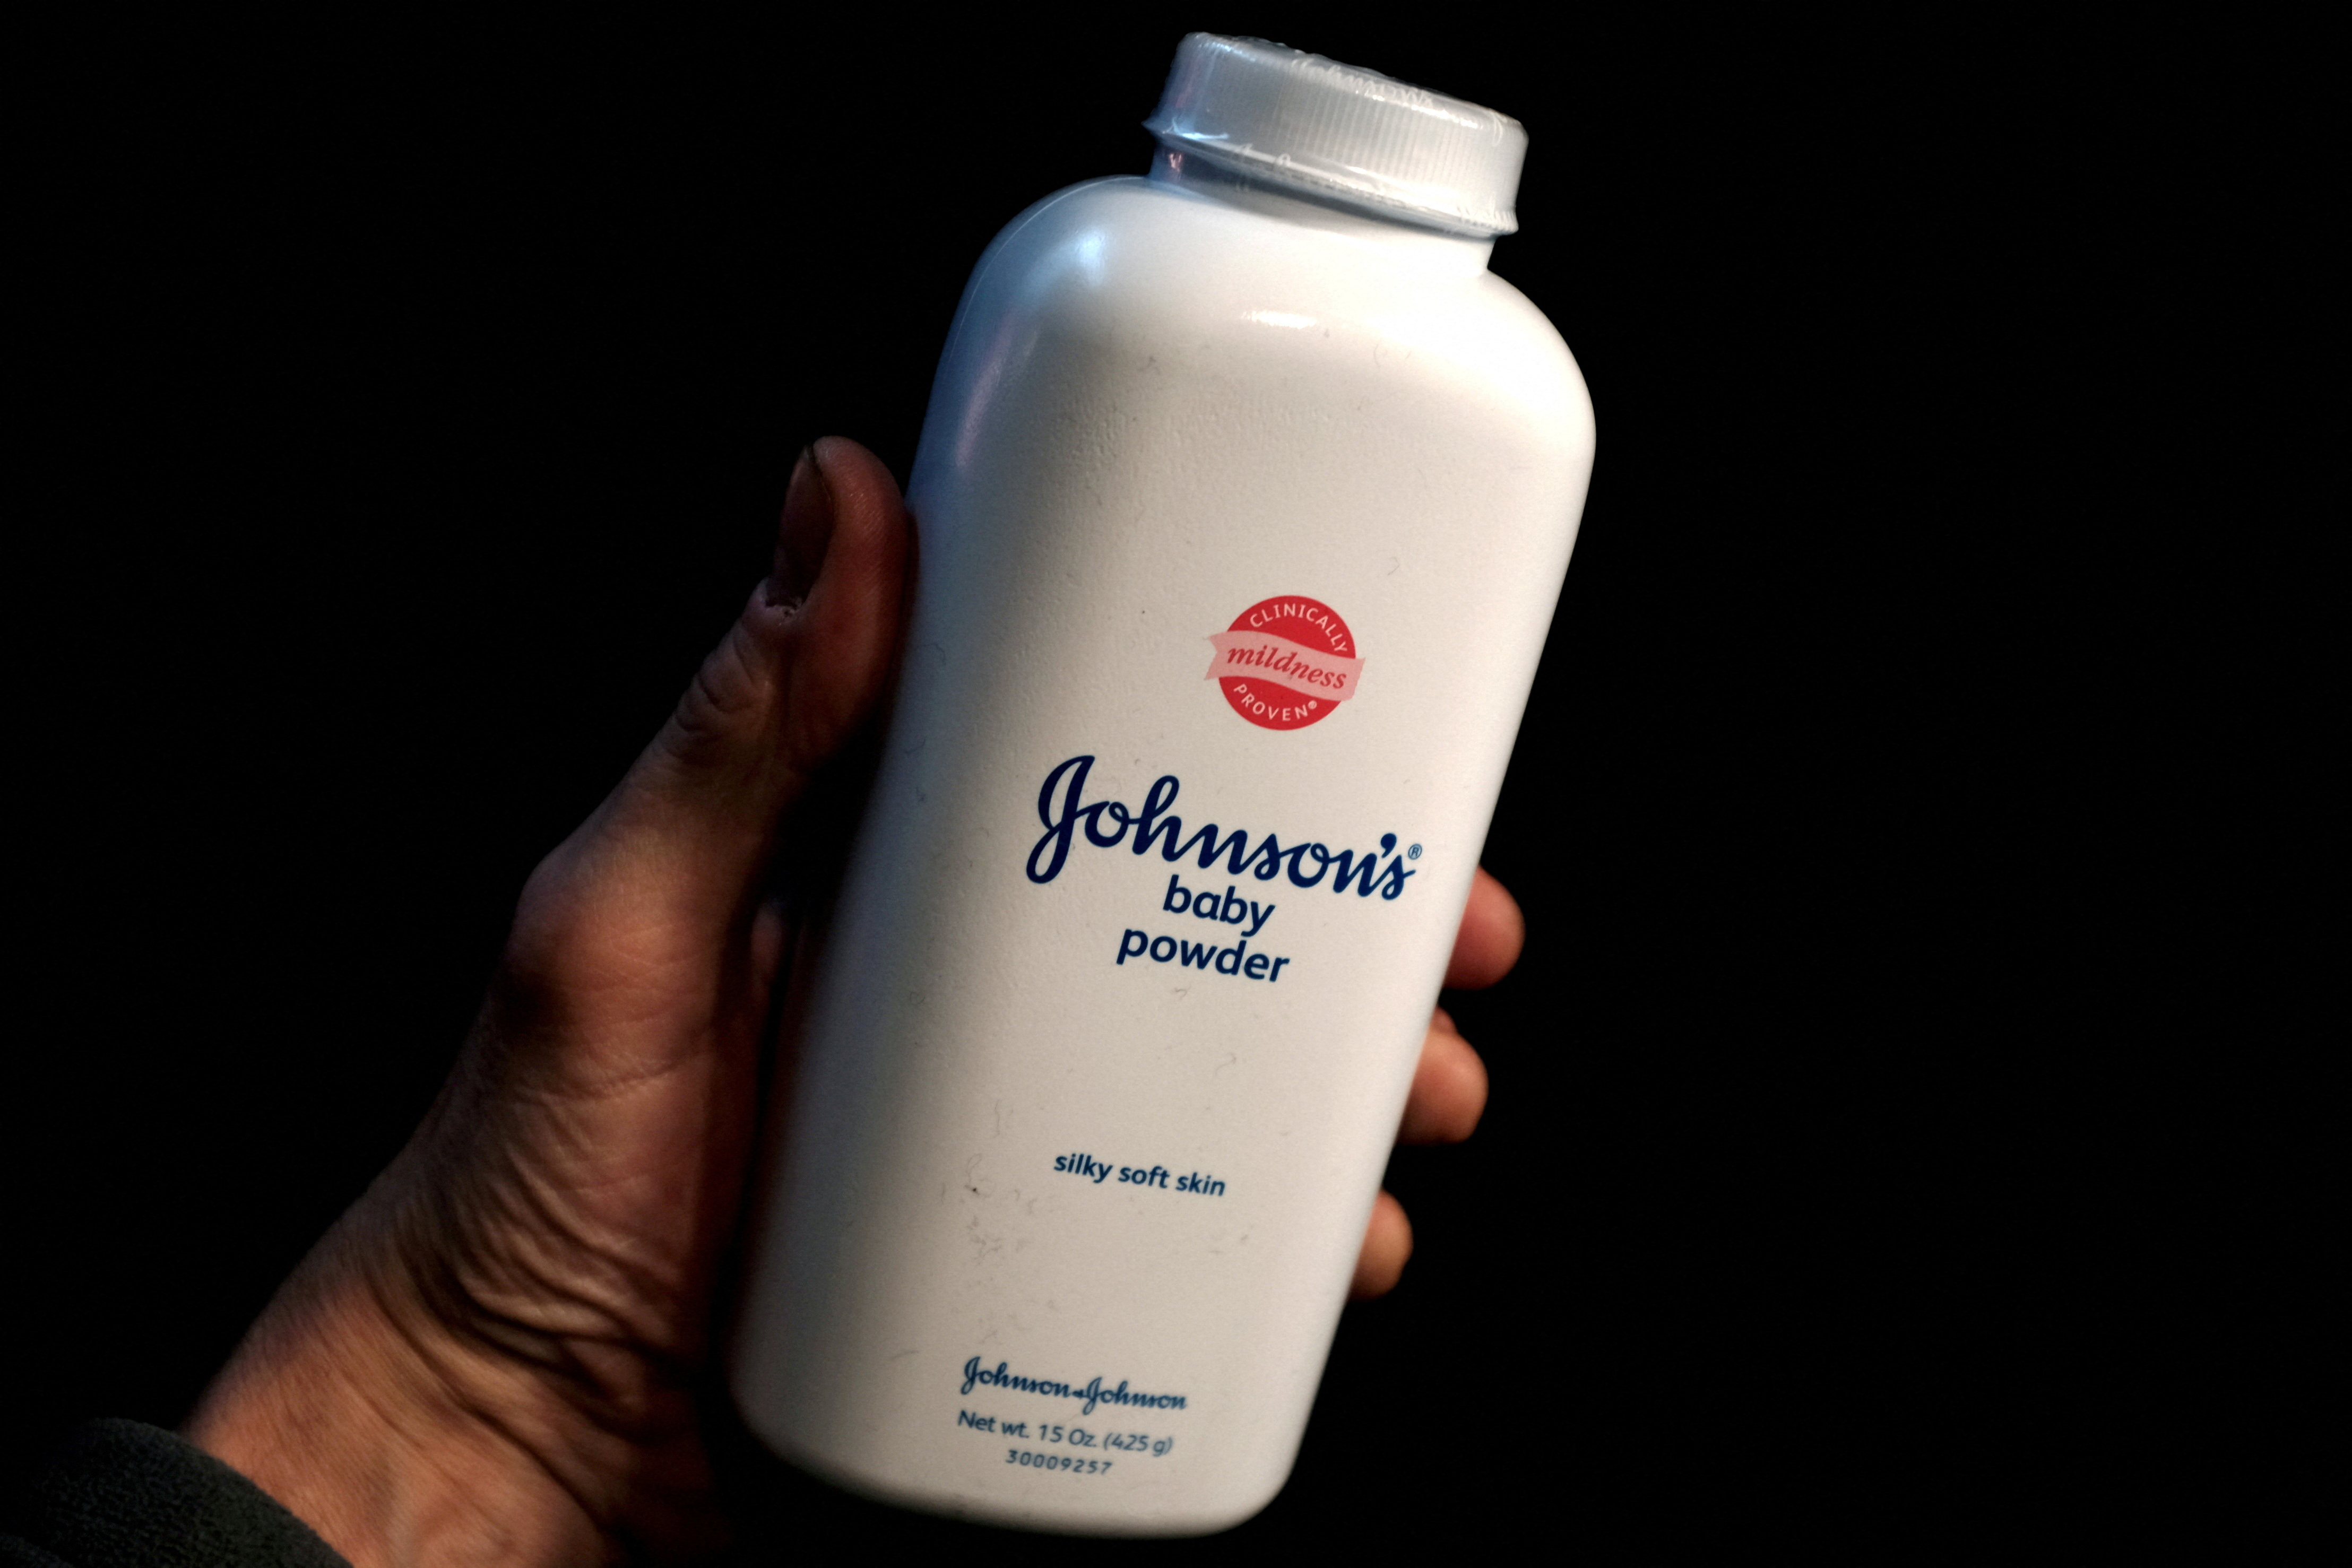 Jurors urged to impose heavy punitive damages in J&J talc trial